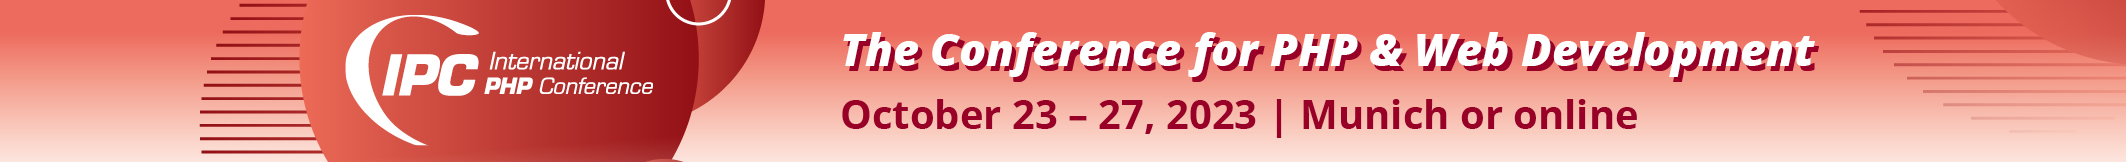 Presented by International PHP Conference